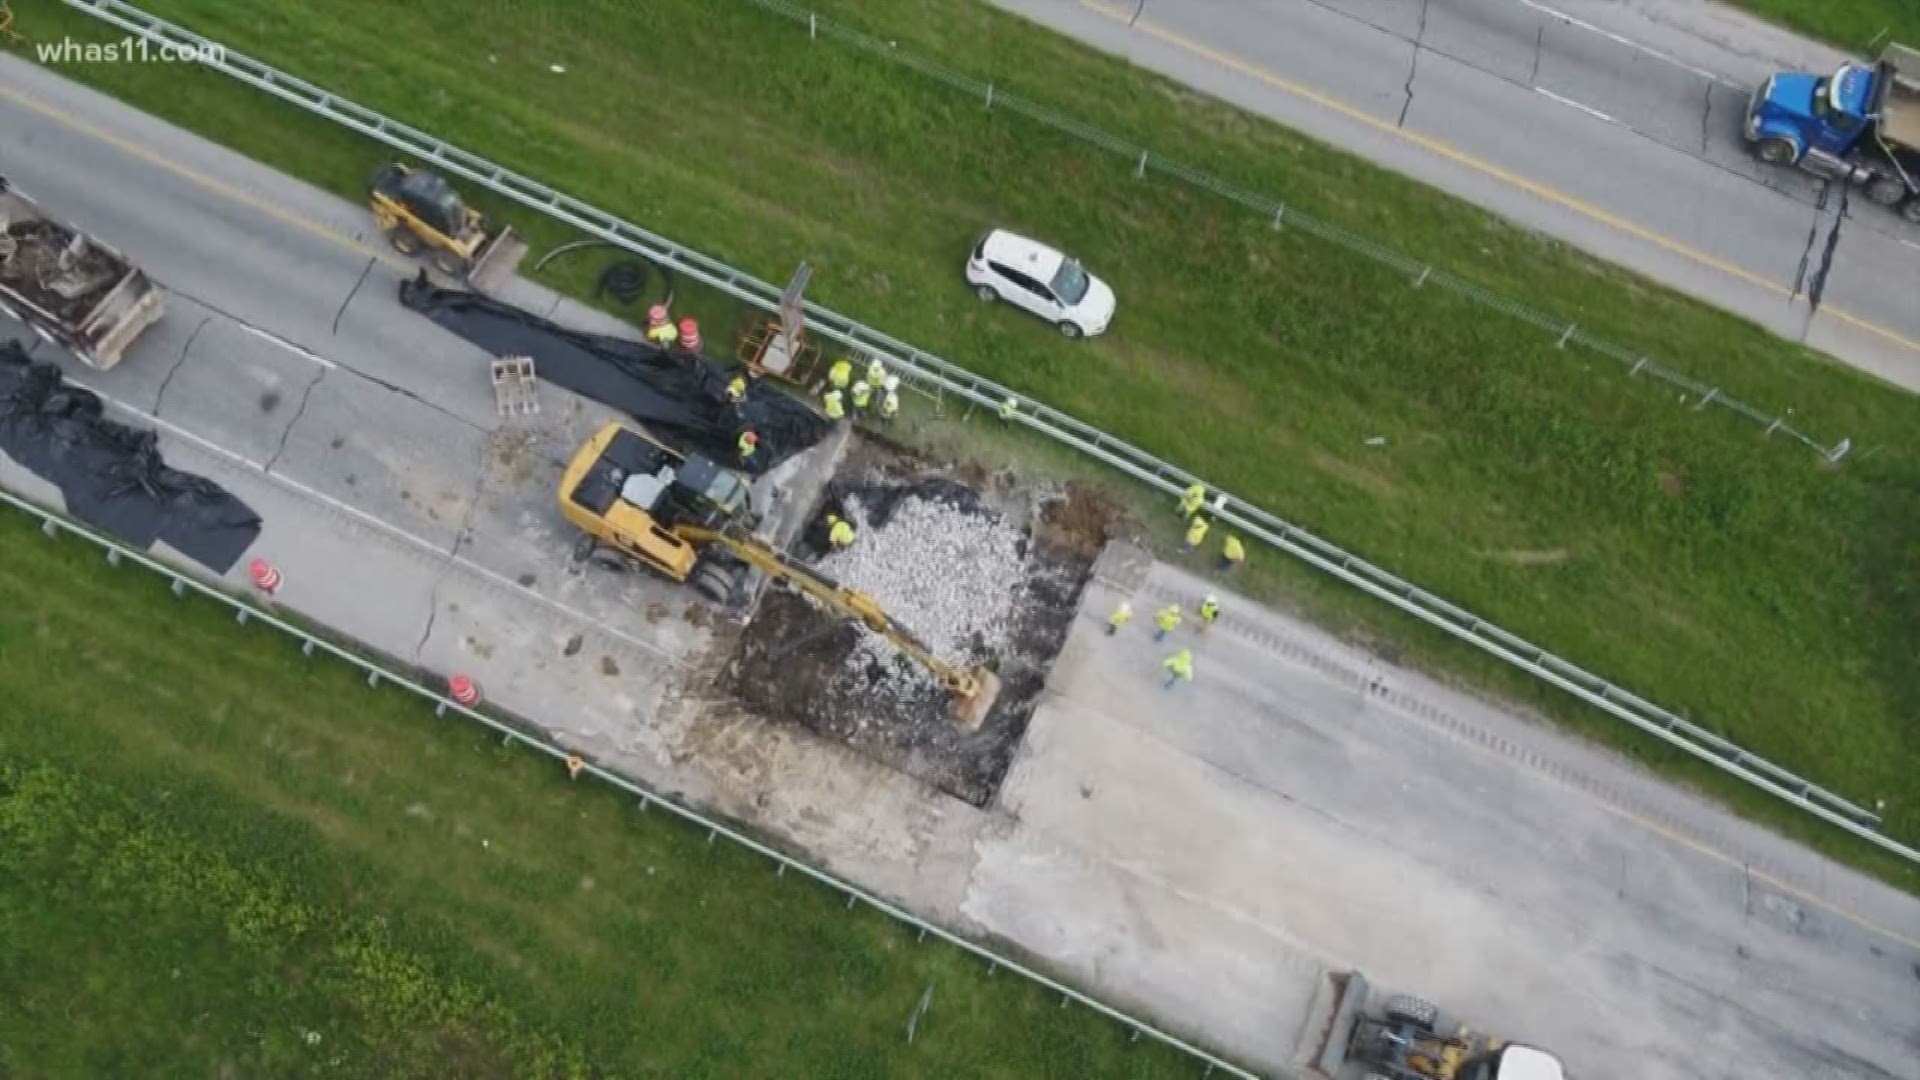 After a sinkhole closed down part of the highway, backed up traffic caused an accident on I-265 near New Albany that killed two people.